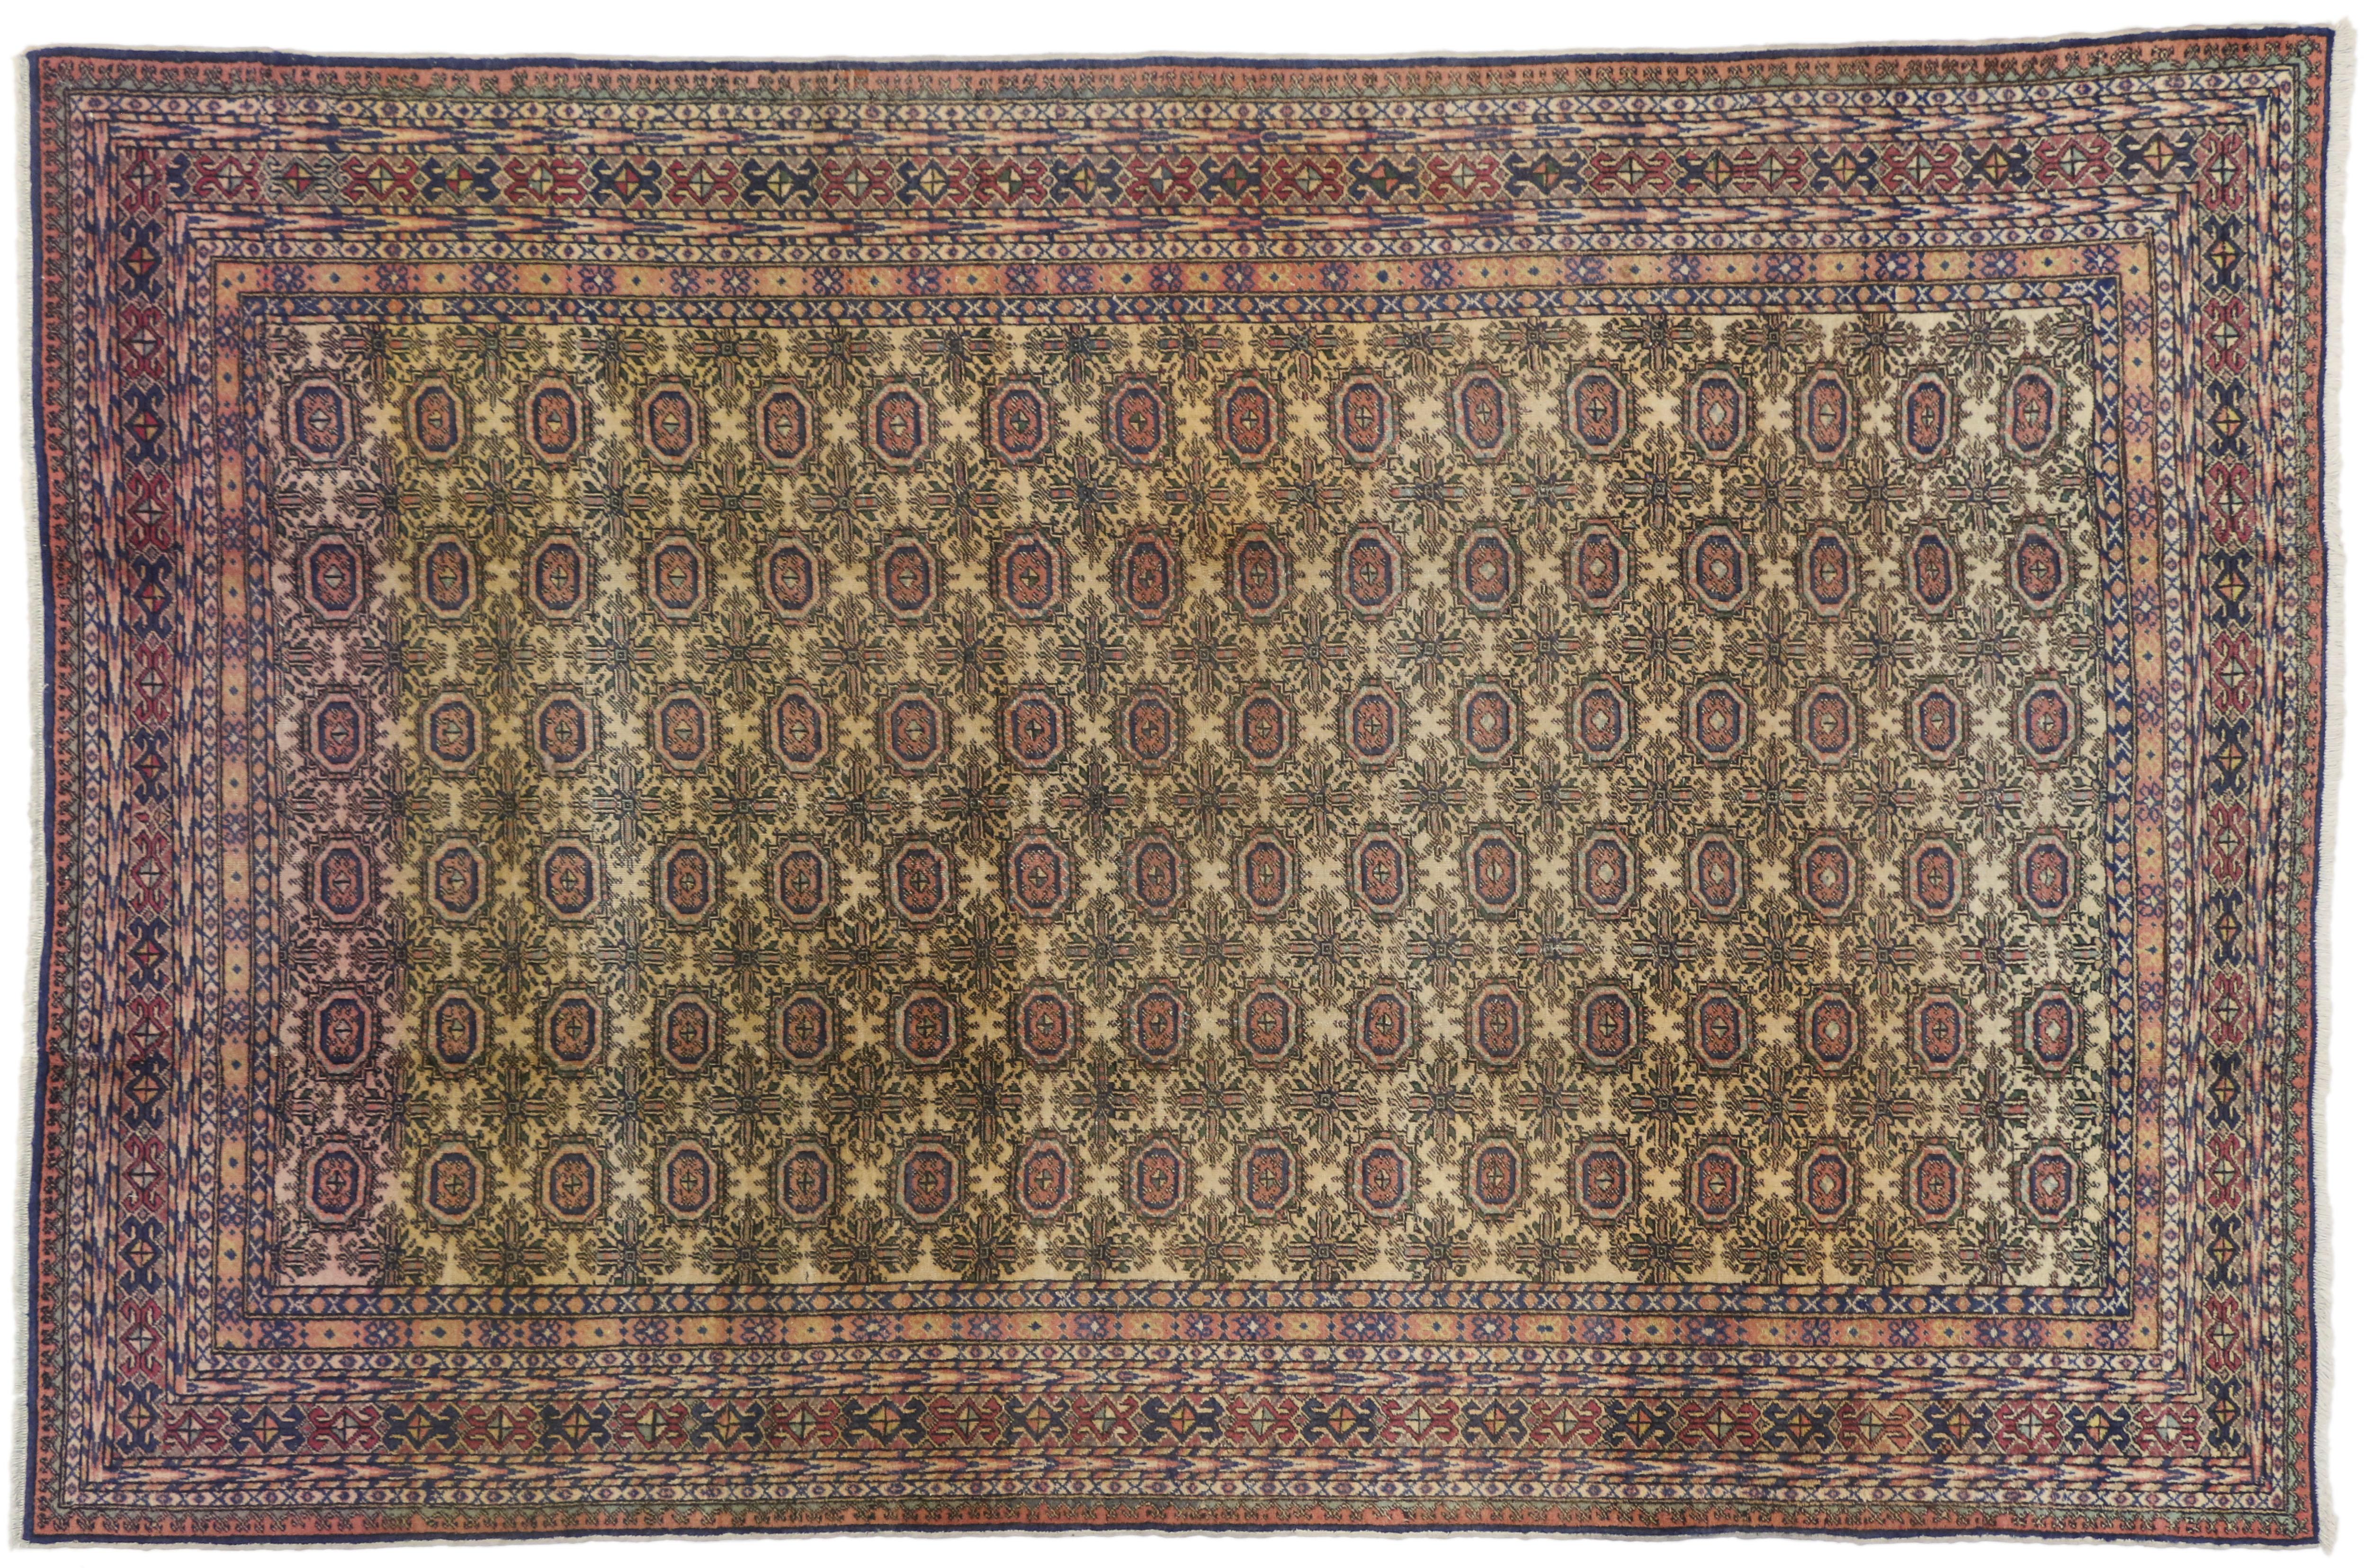 20th Century Vintage Turkish Sivas Rug with Bohemian Style, Pink and Purple Hues